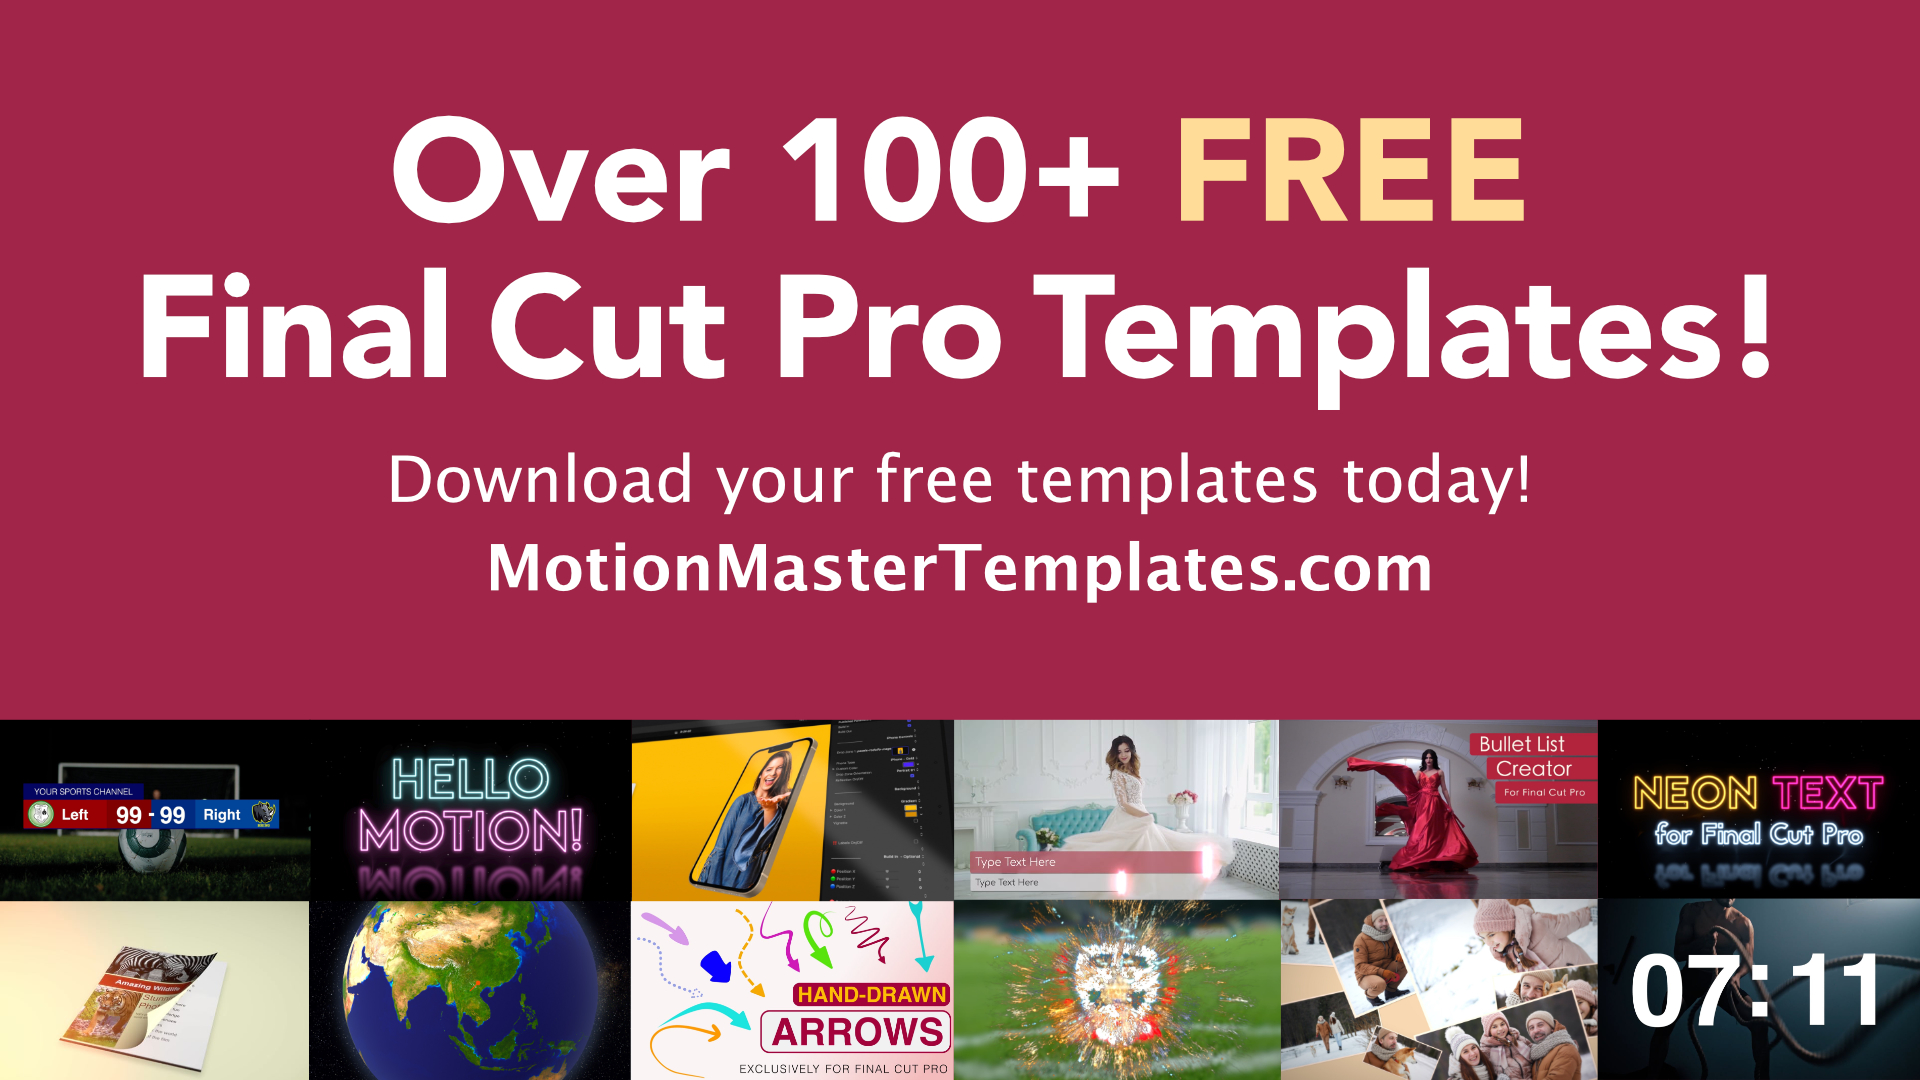 Over 100+ Free Templates for Final Cut Pro